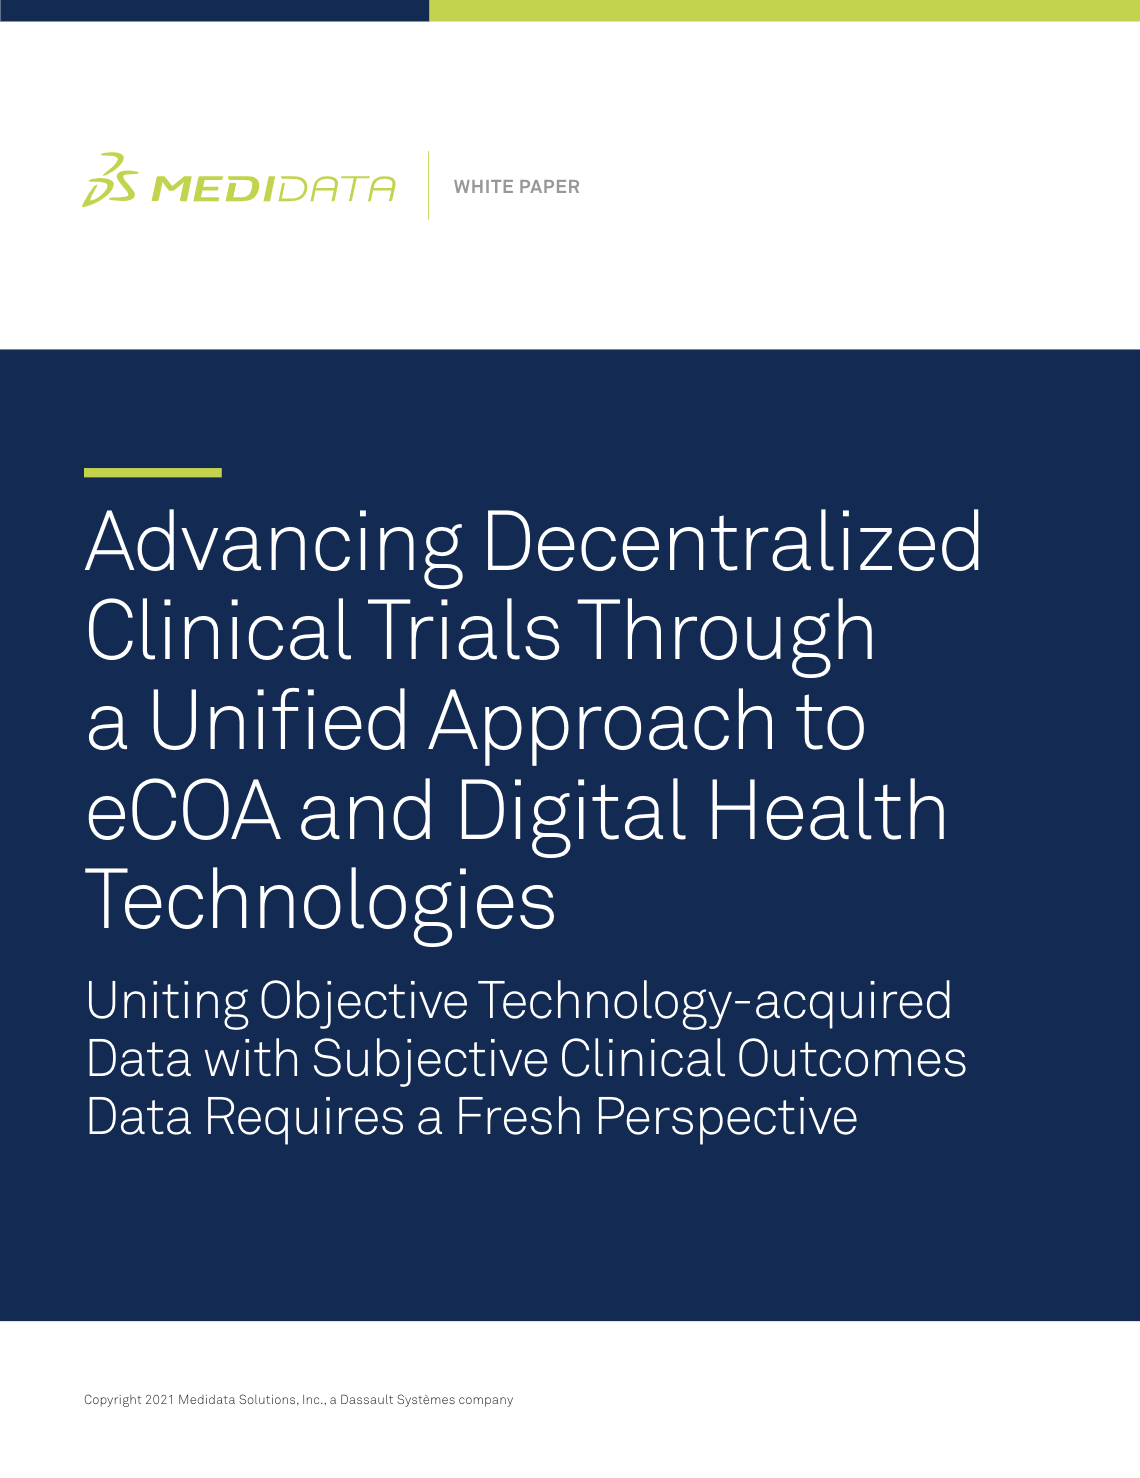 Advancing Decentralized Clinical Trials Through a Unified Approach to eCOA and DHTs